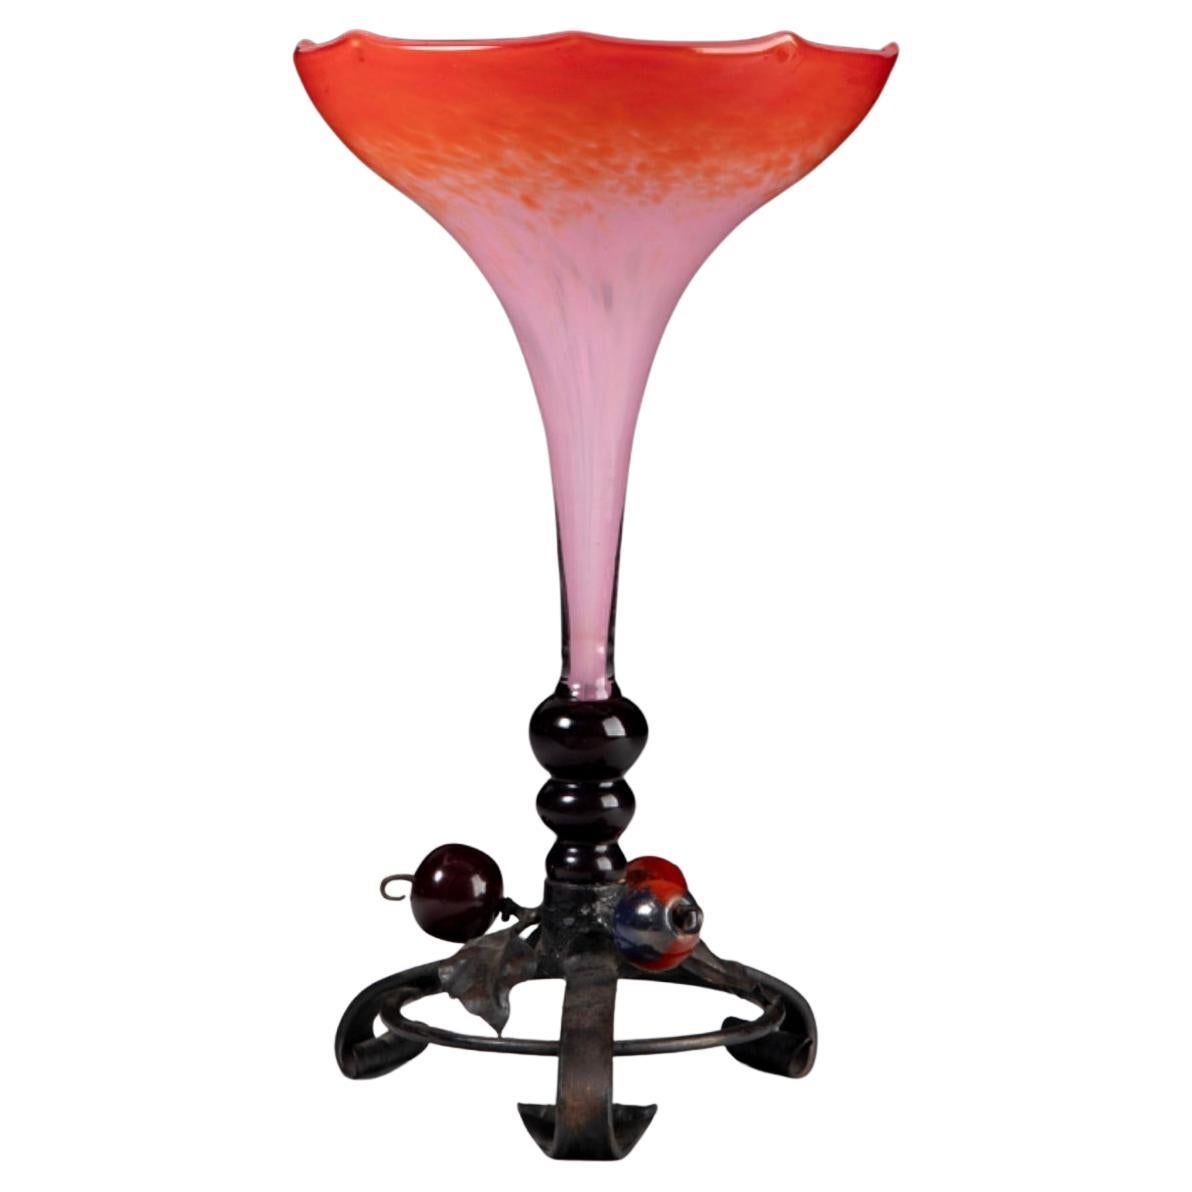 Schneider Mottled Glass Vase with Wrought Iron Mount Circa 1920 For Sale